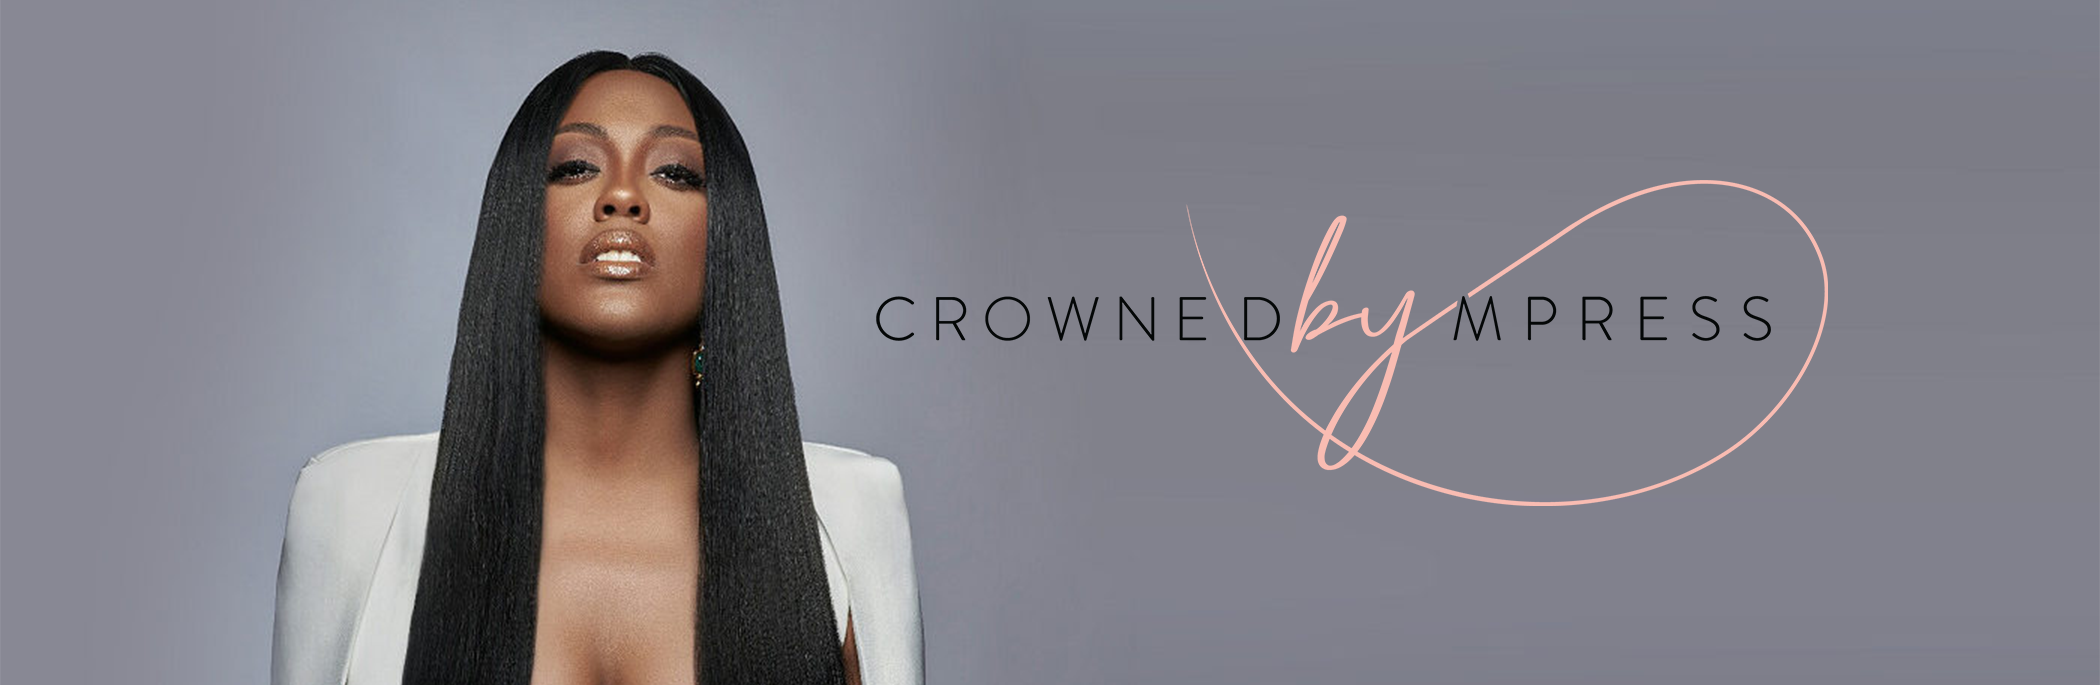 Crowned by Mpress Banner